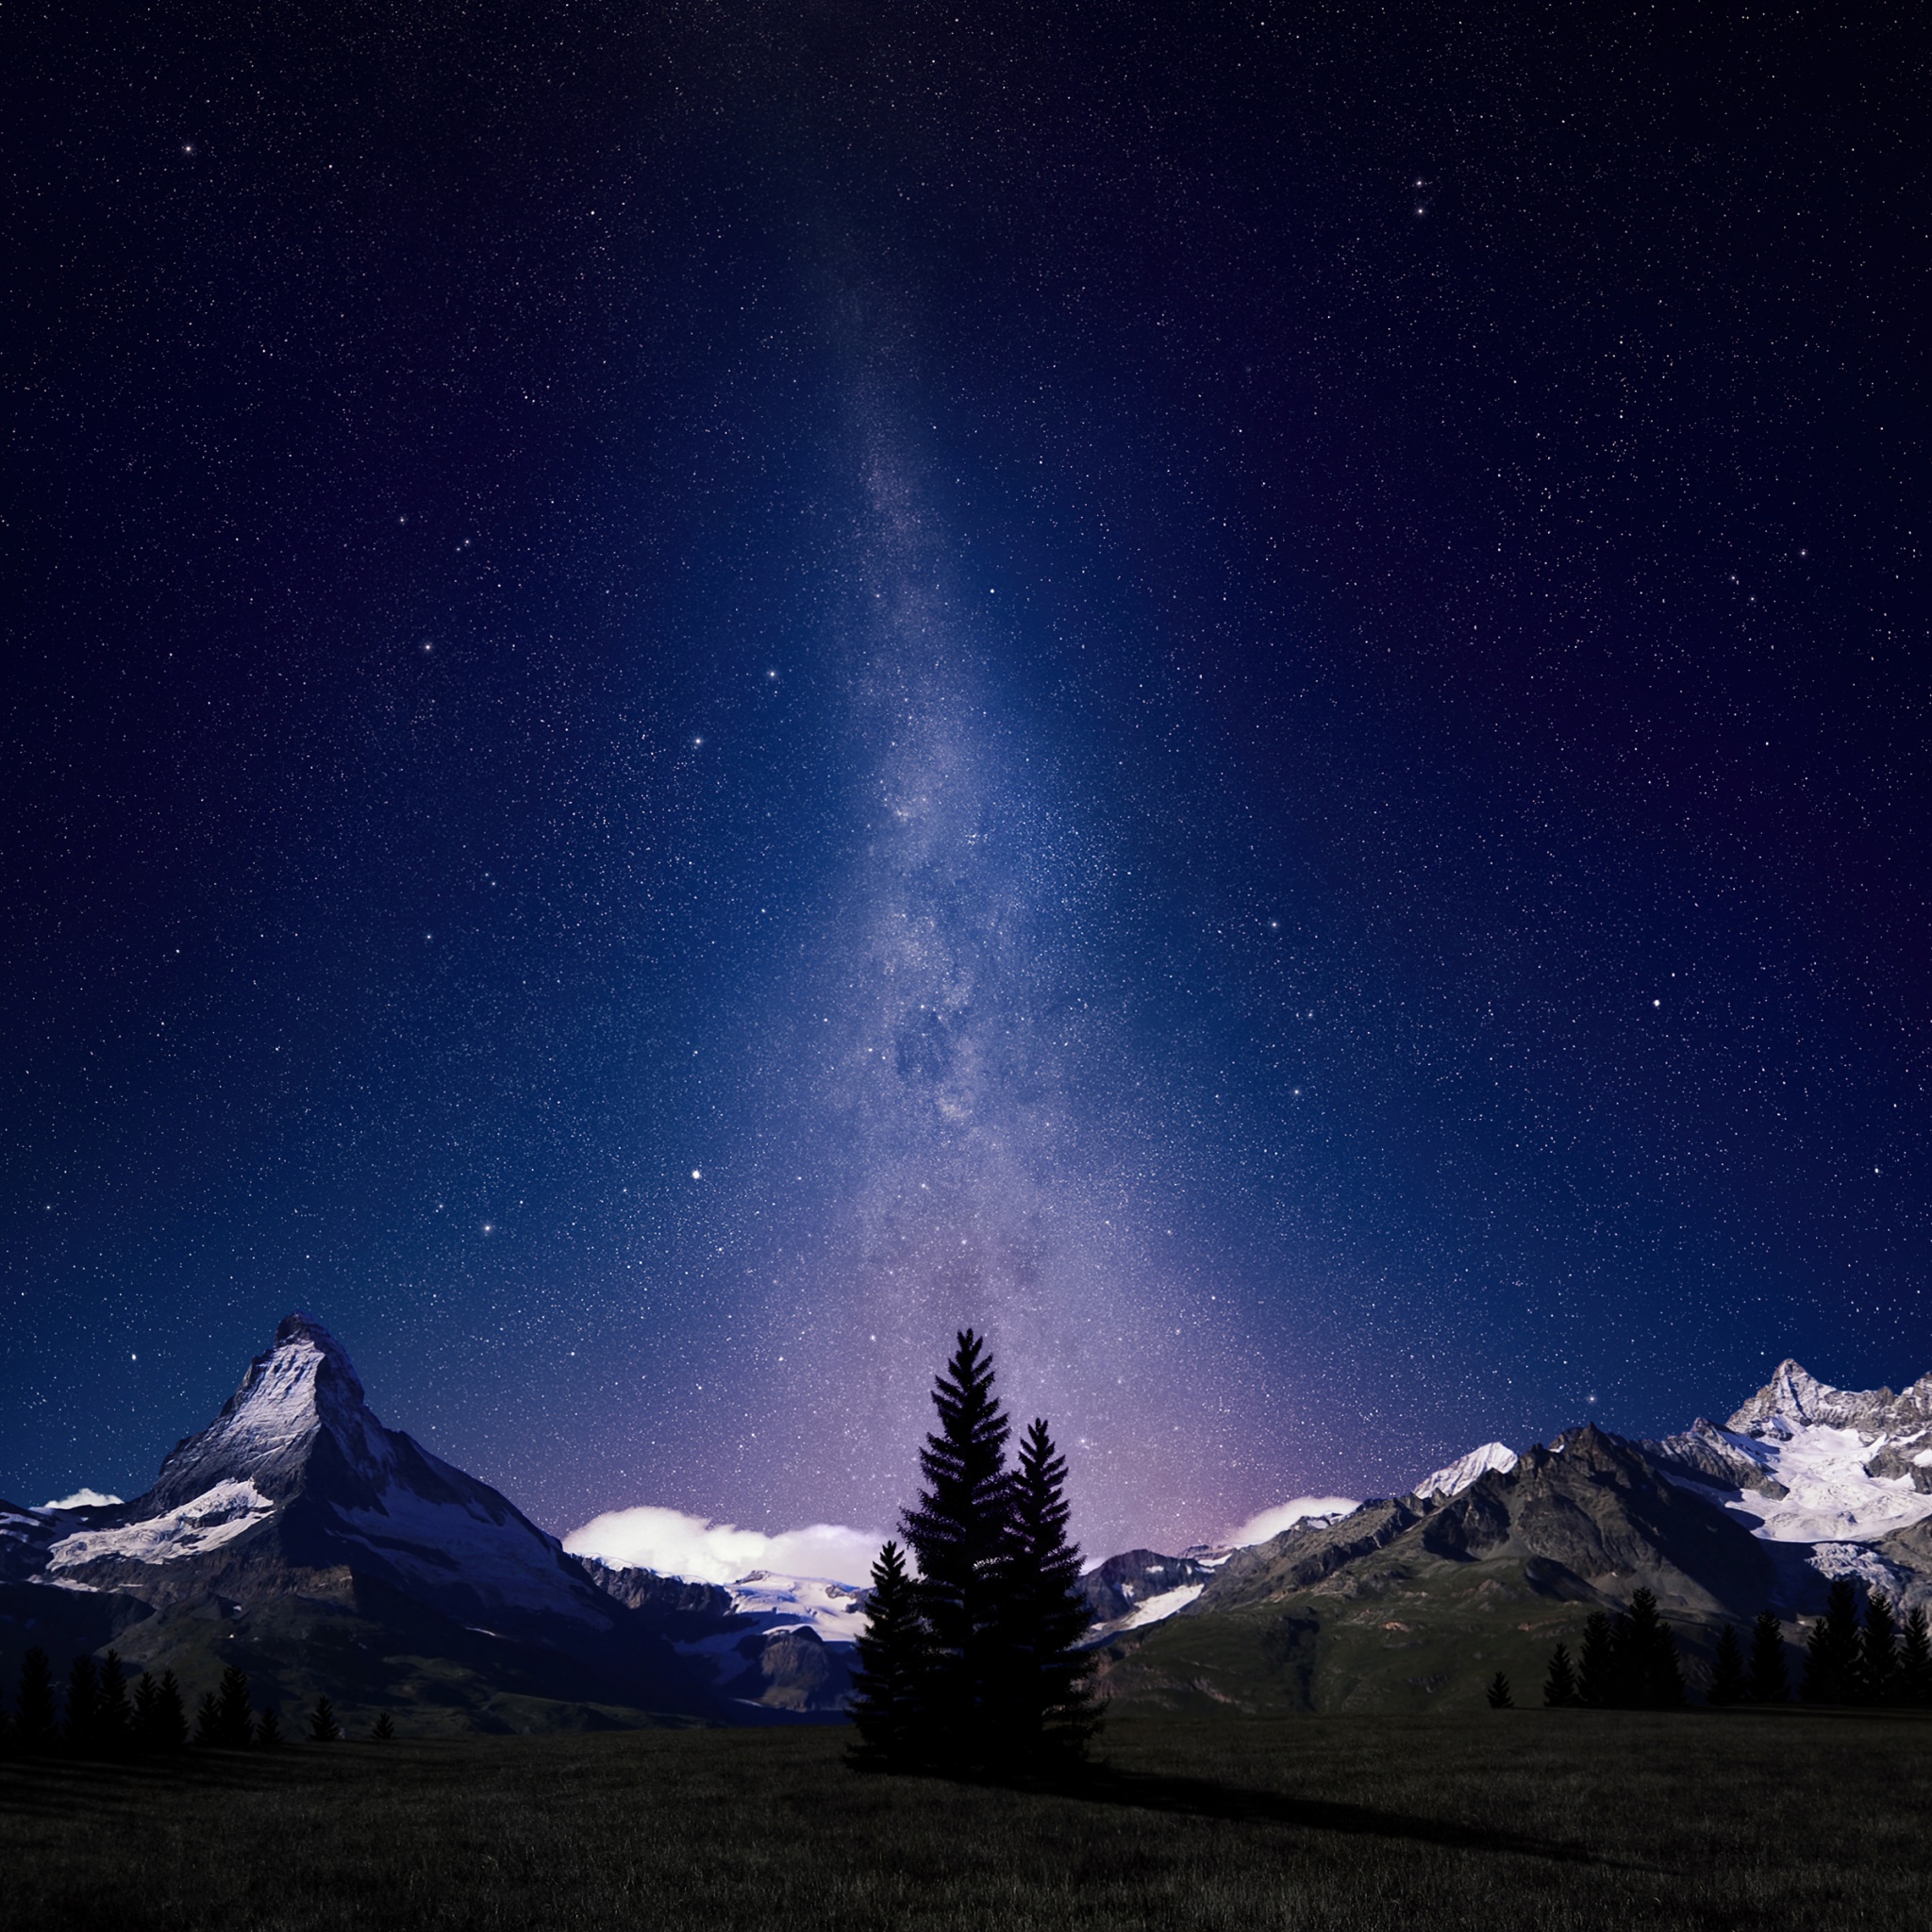 160+ Milky Way HD Wallpapers and Backgrounds